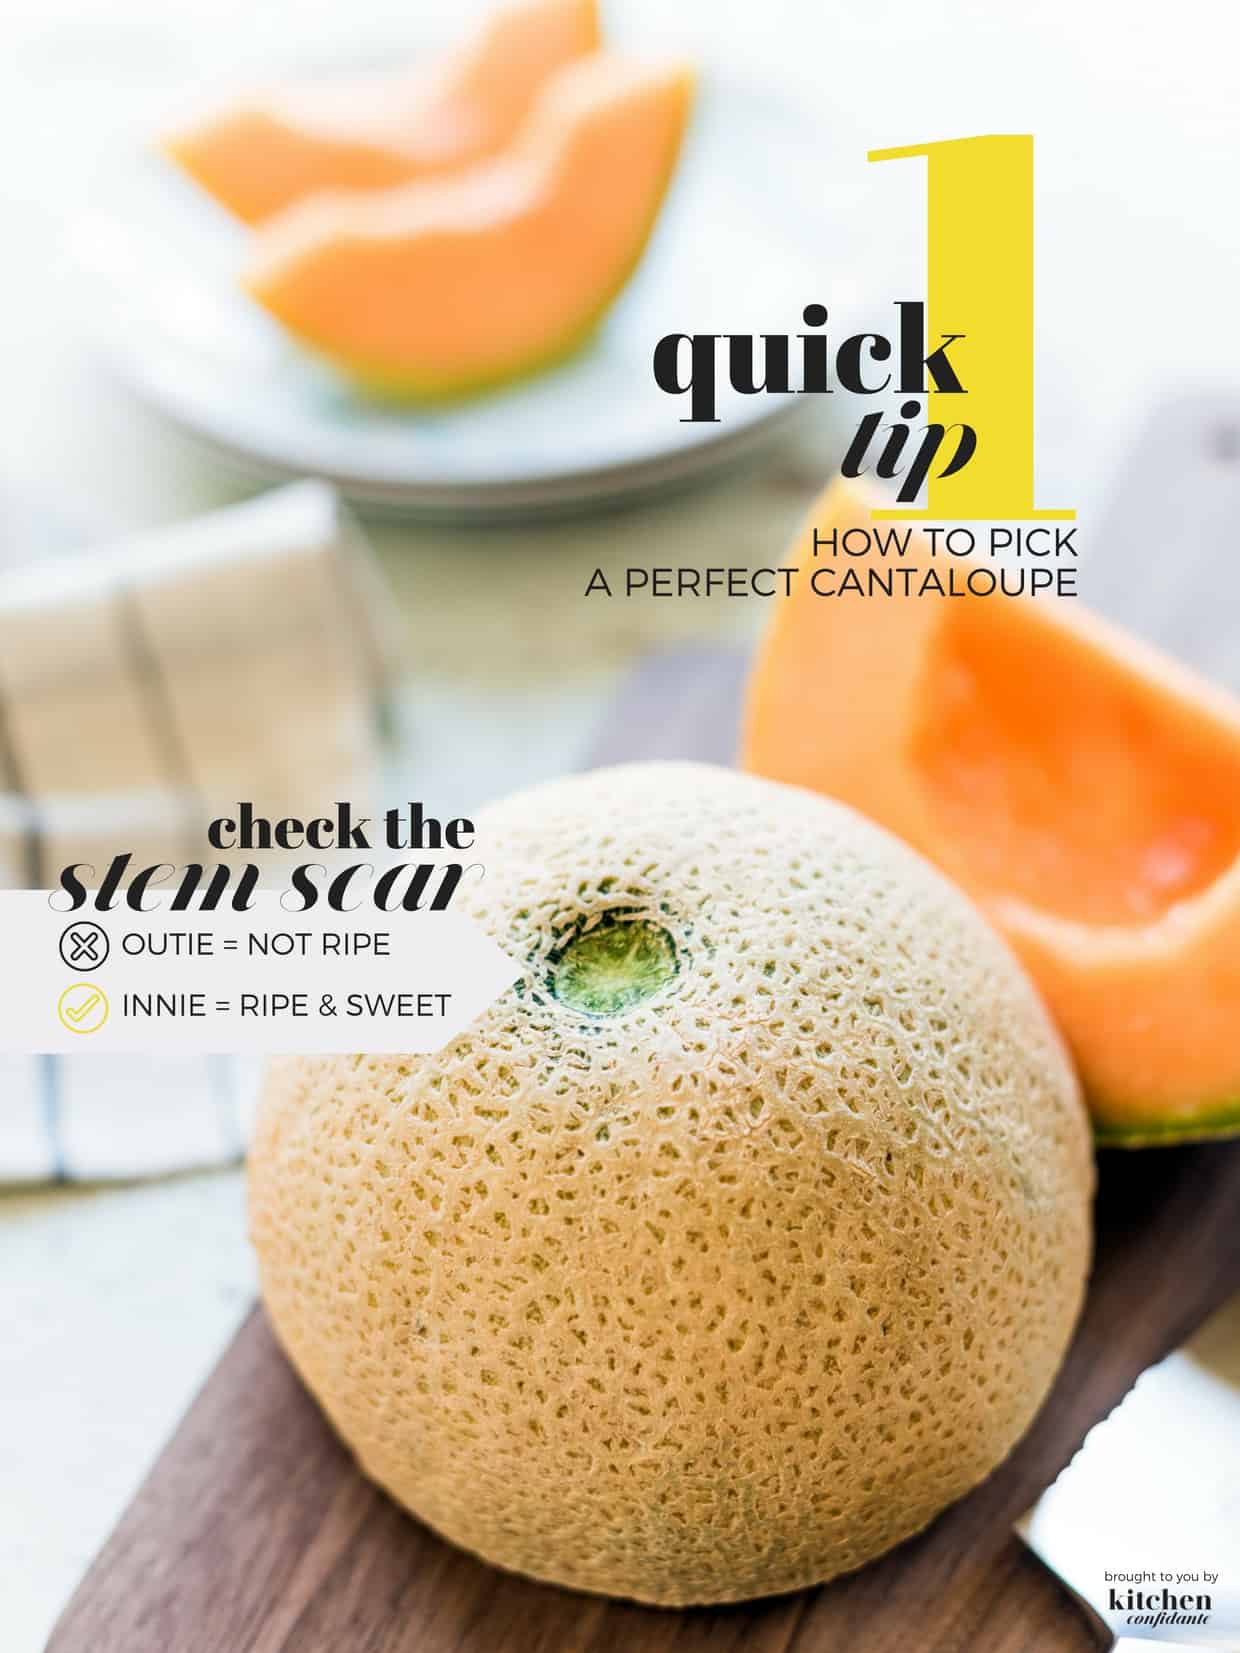 Ripe cantaloupe on a wooden cutting board. The text reads "One quick tip - How to Pick a Cantaloupe", then "Outie = not ripe. Innie = ripe & sweet".